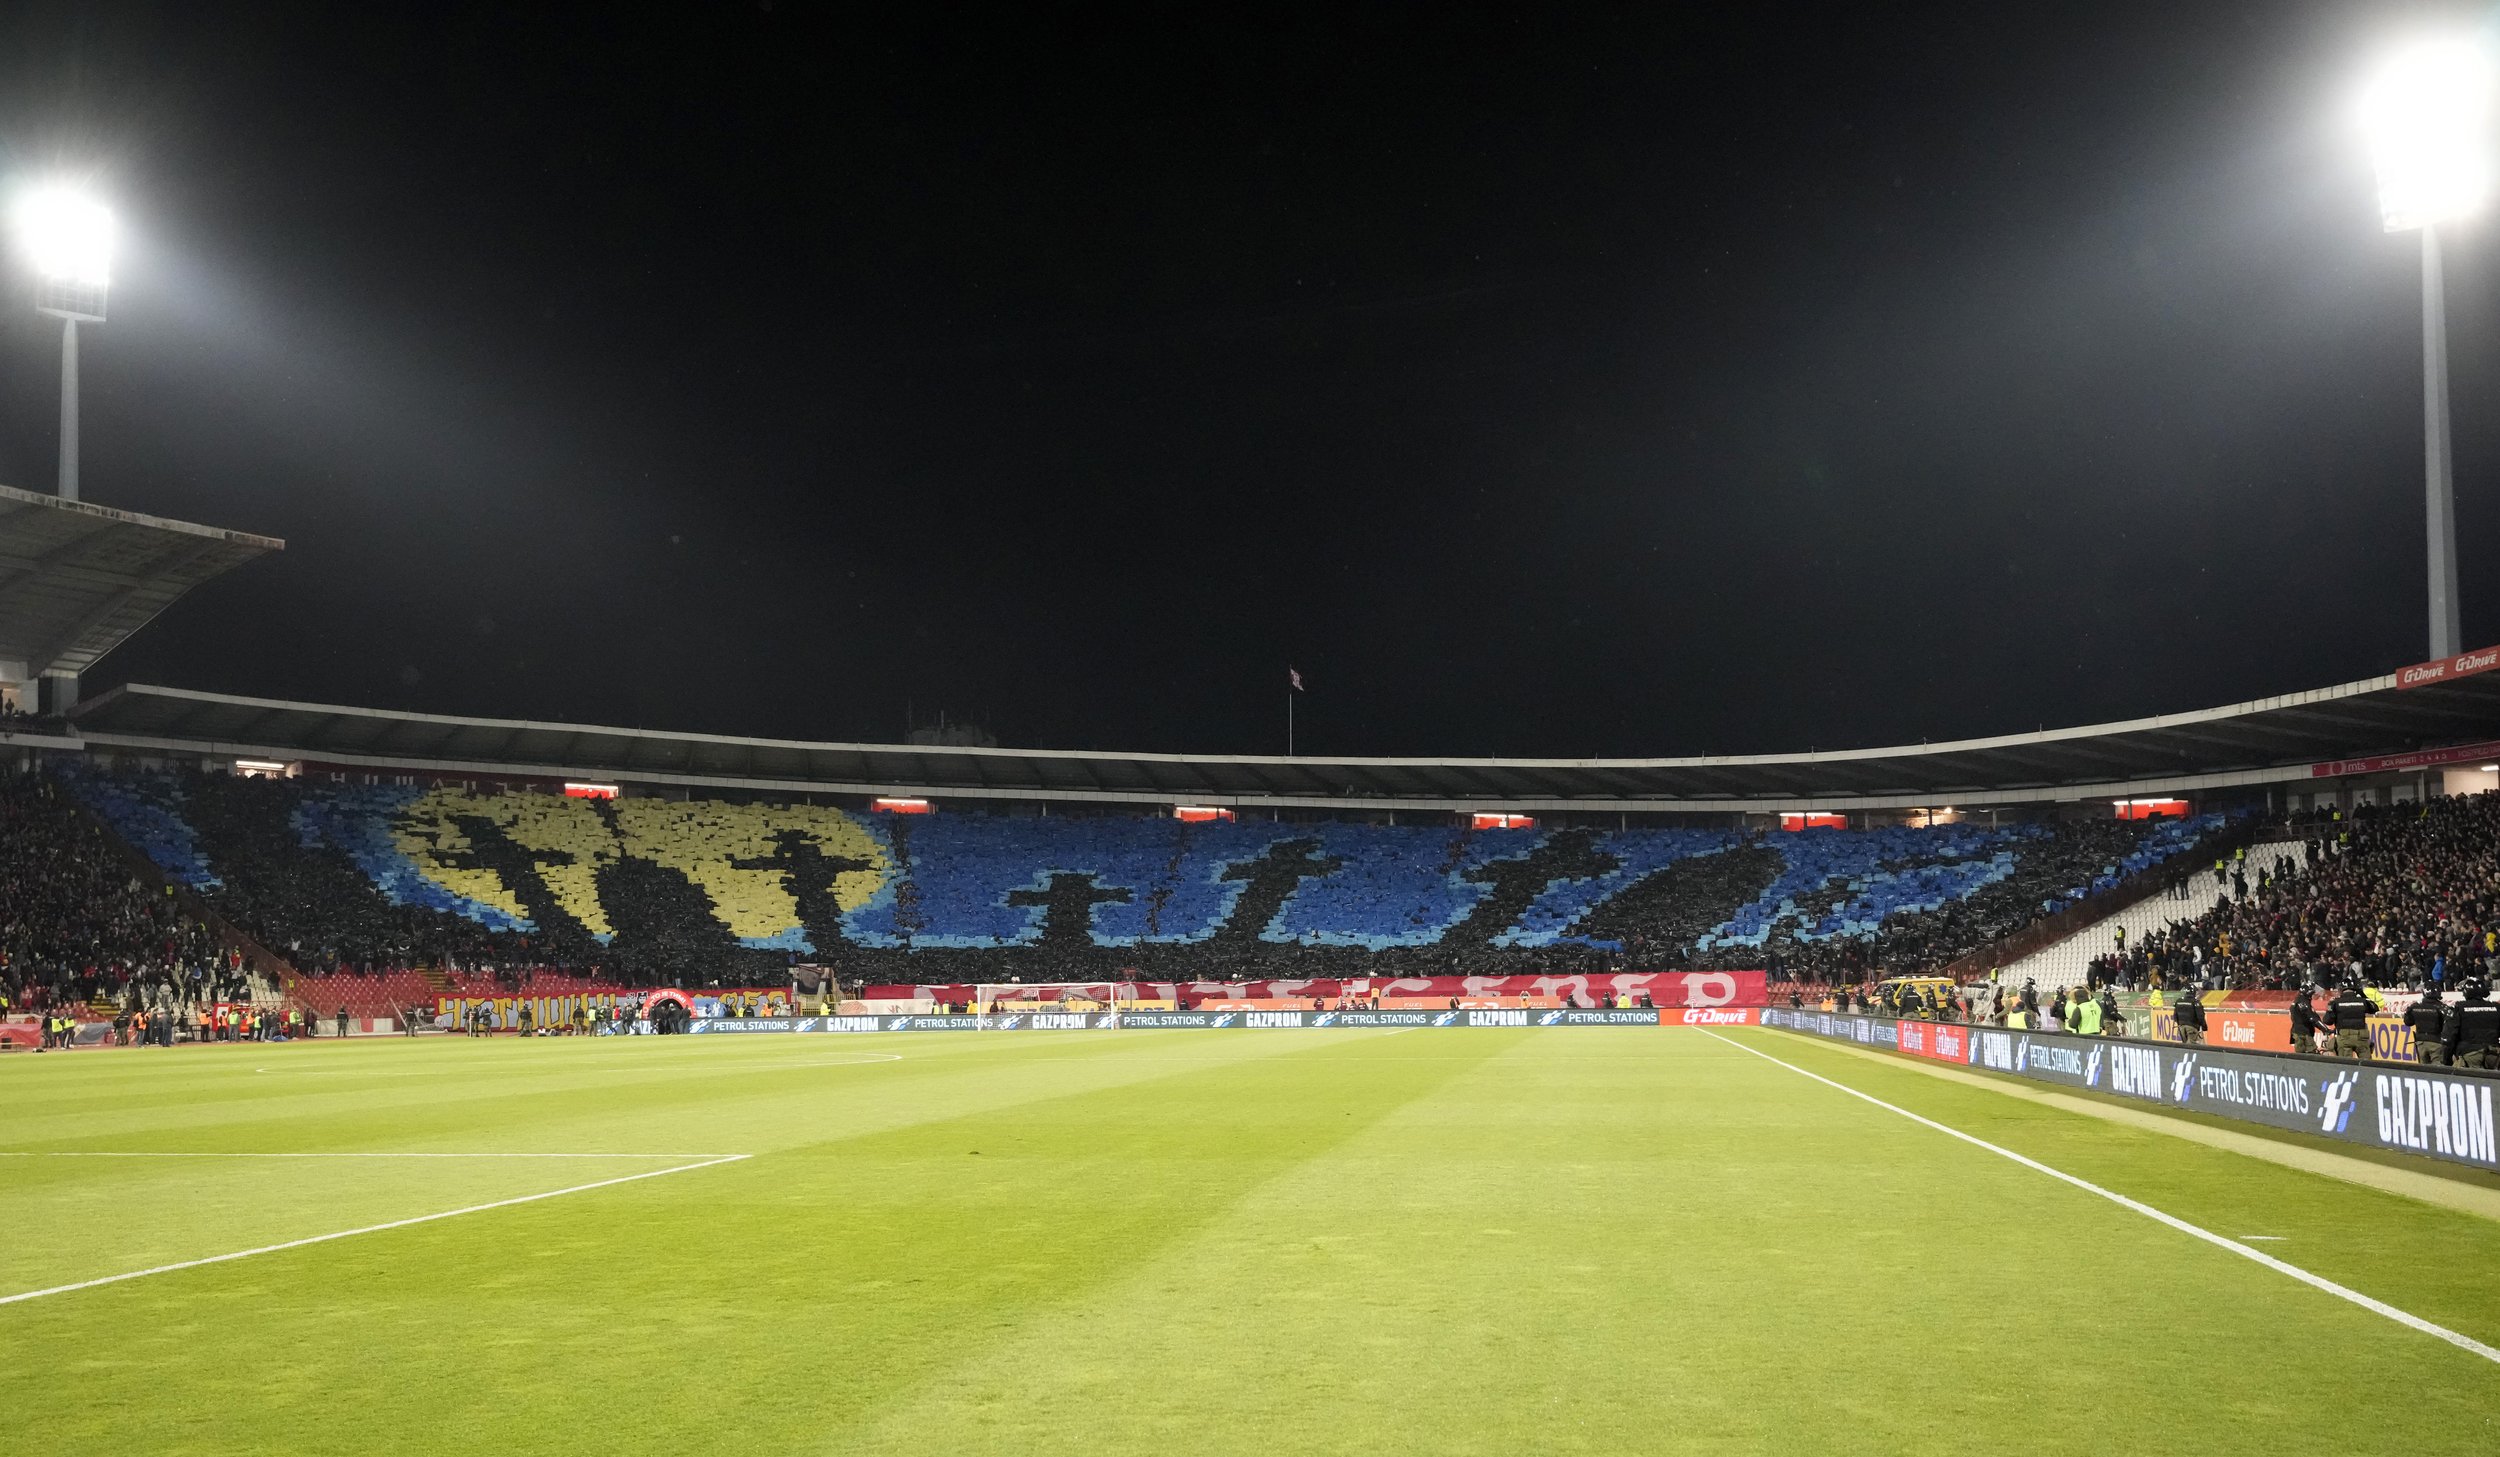  Red Star fans form an image of a gravestones in yellow and blue colors before a Serbian National soccer league derby match between Red Star and Partizan in Belgrade, Serbia, Sunday, Feb. 27, 2022. (AP Photo/Darko Vojinovic) 